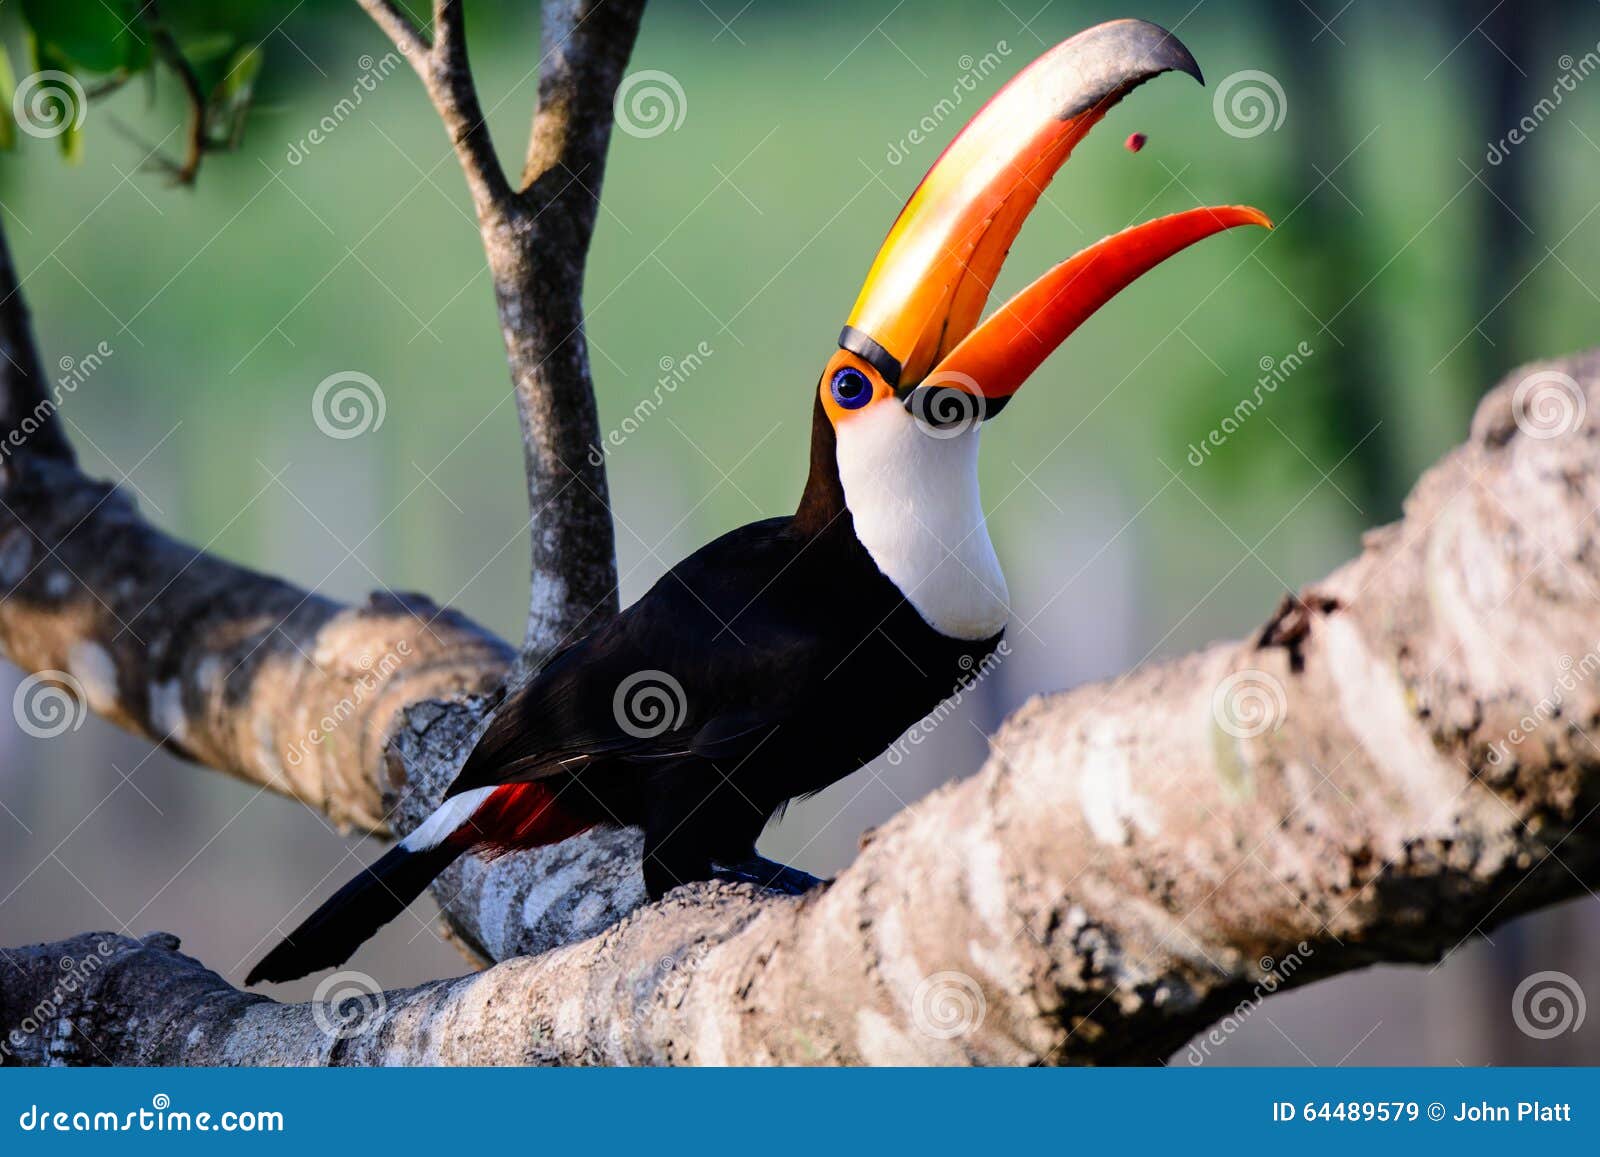 toca toucan devouring its meal